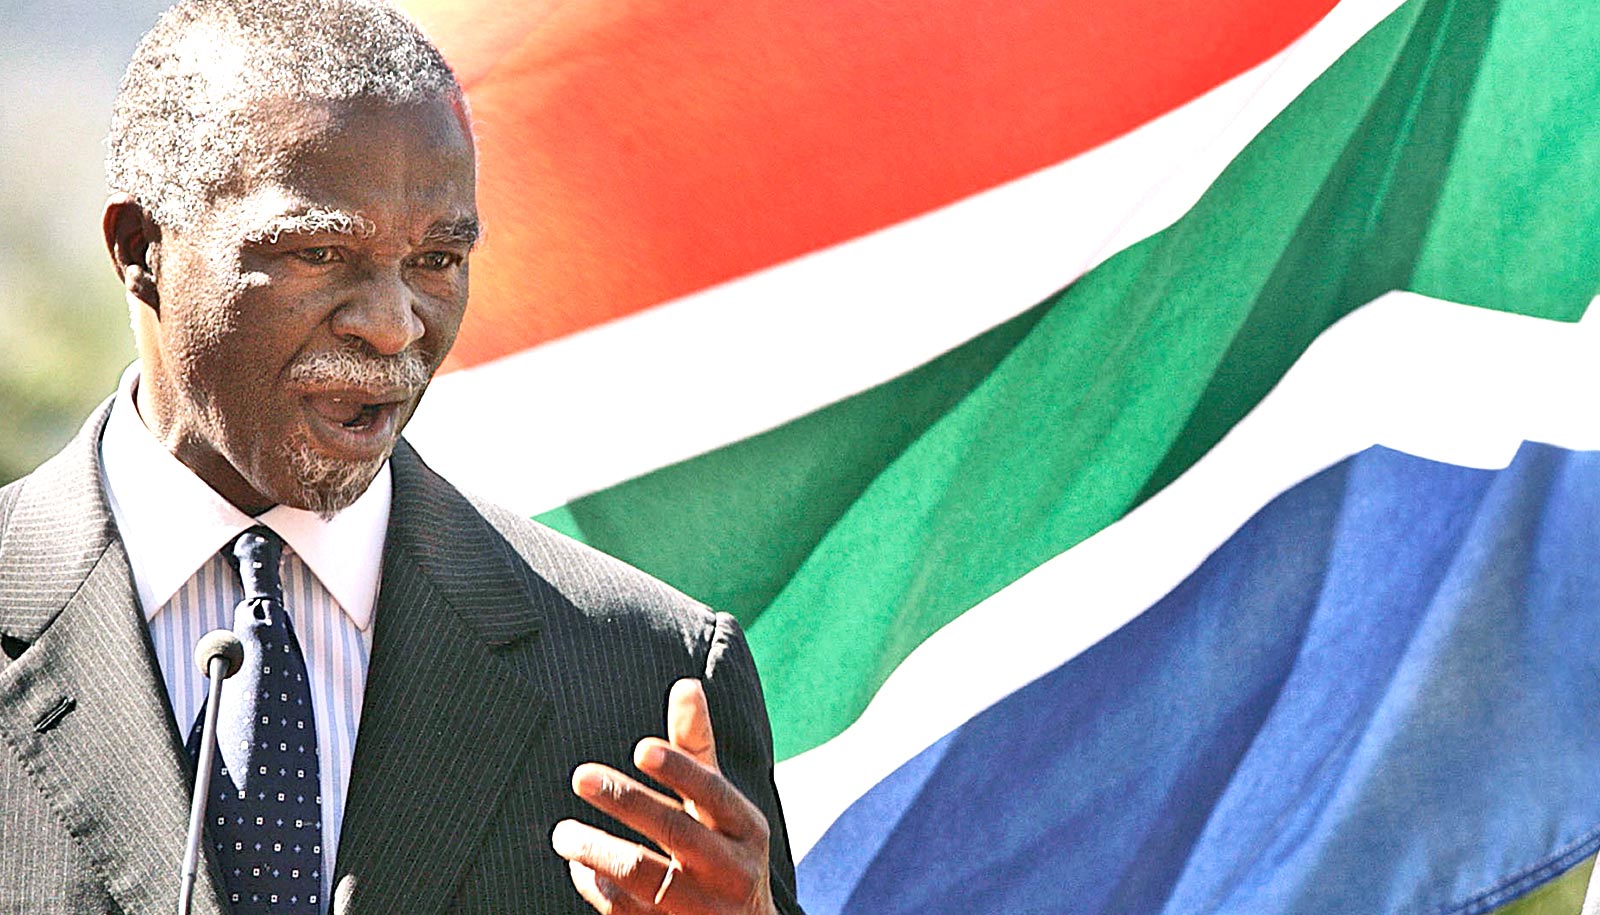  President Thabo Mbeki of South Africa speaks during a press conference on June 1, 2007 in Pretoria, South Africa. (Credit: Peter Macdiarmid/Getty Images)